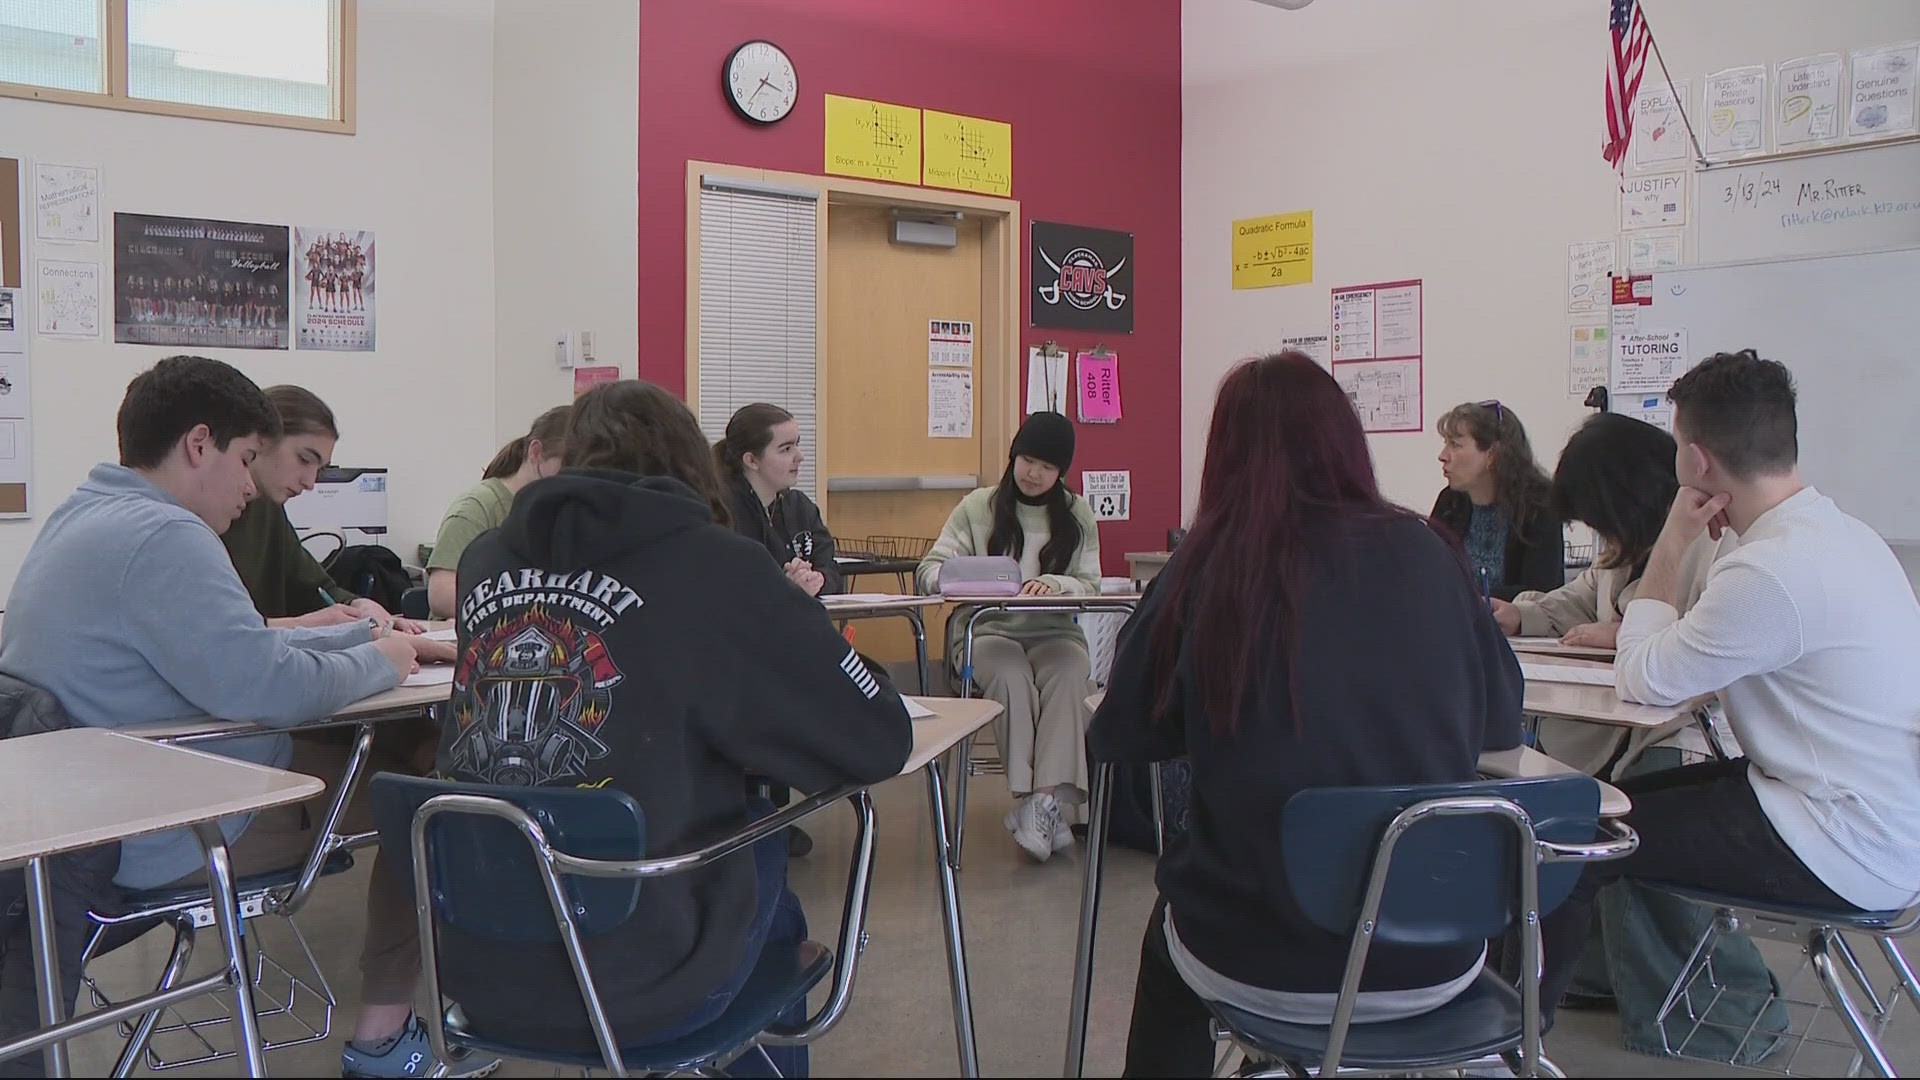 A community service program in Portland challenges teens to find an issue they're passionate about and look for ways to improve it.